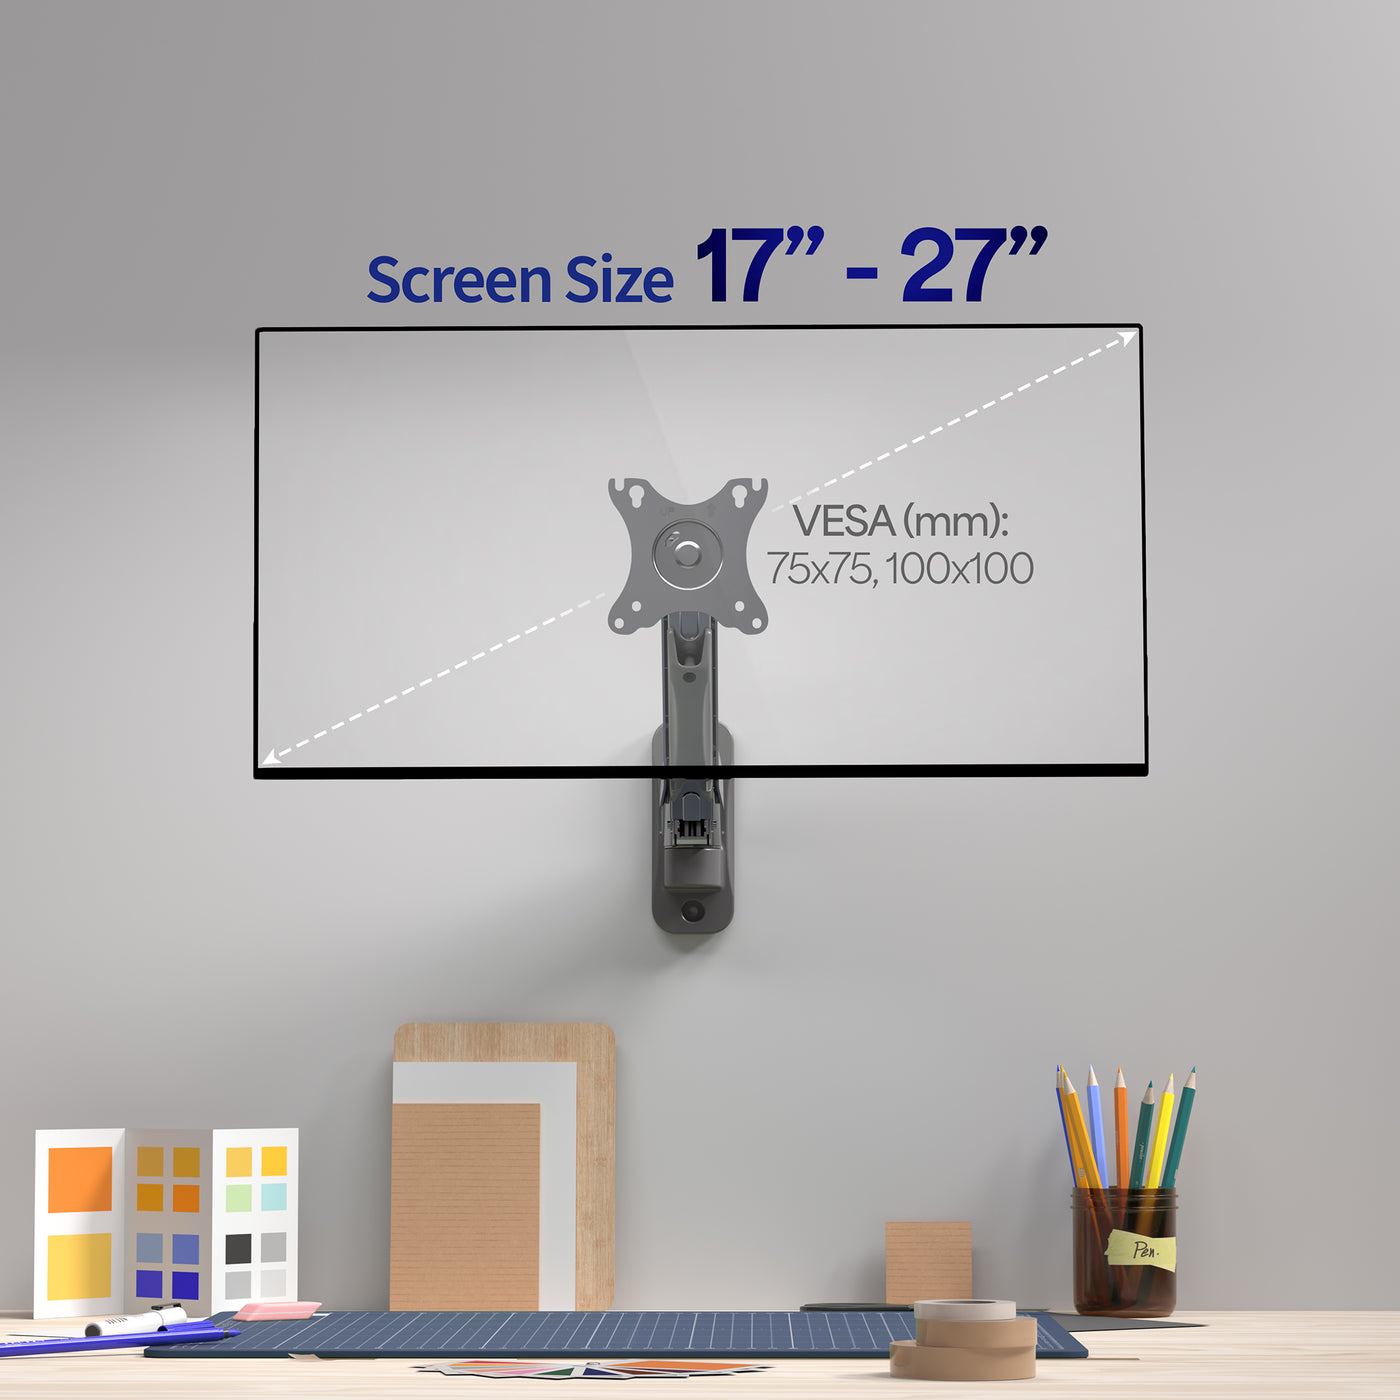 Gas Spring Full Articulating Arm Monitor Wall Mount for 17" to 27" Screens